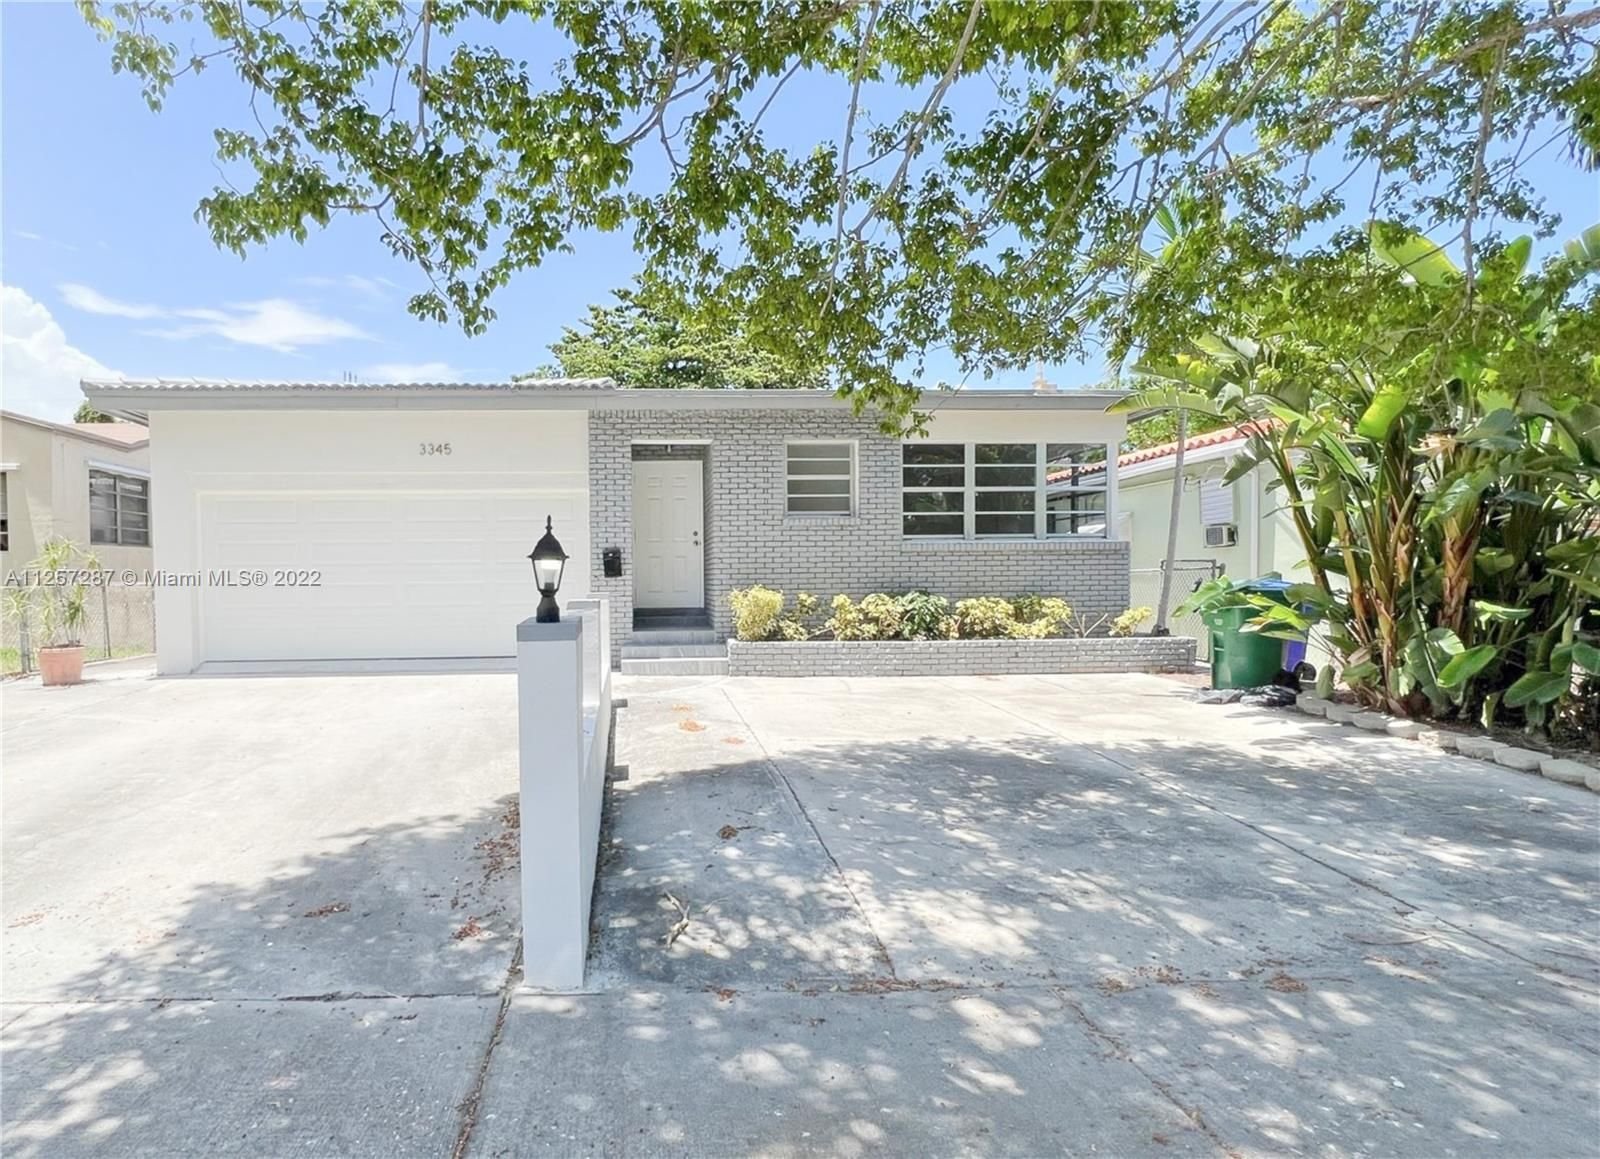 Real estate property located at 3345 1st St, Miami-Dade County, Miami, FL